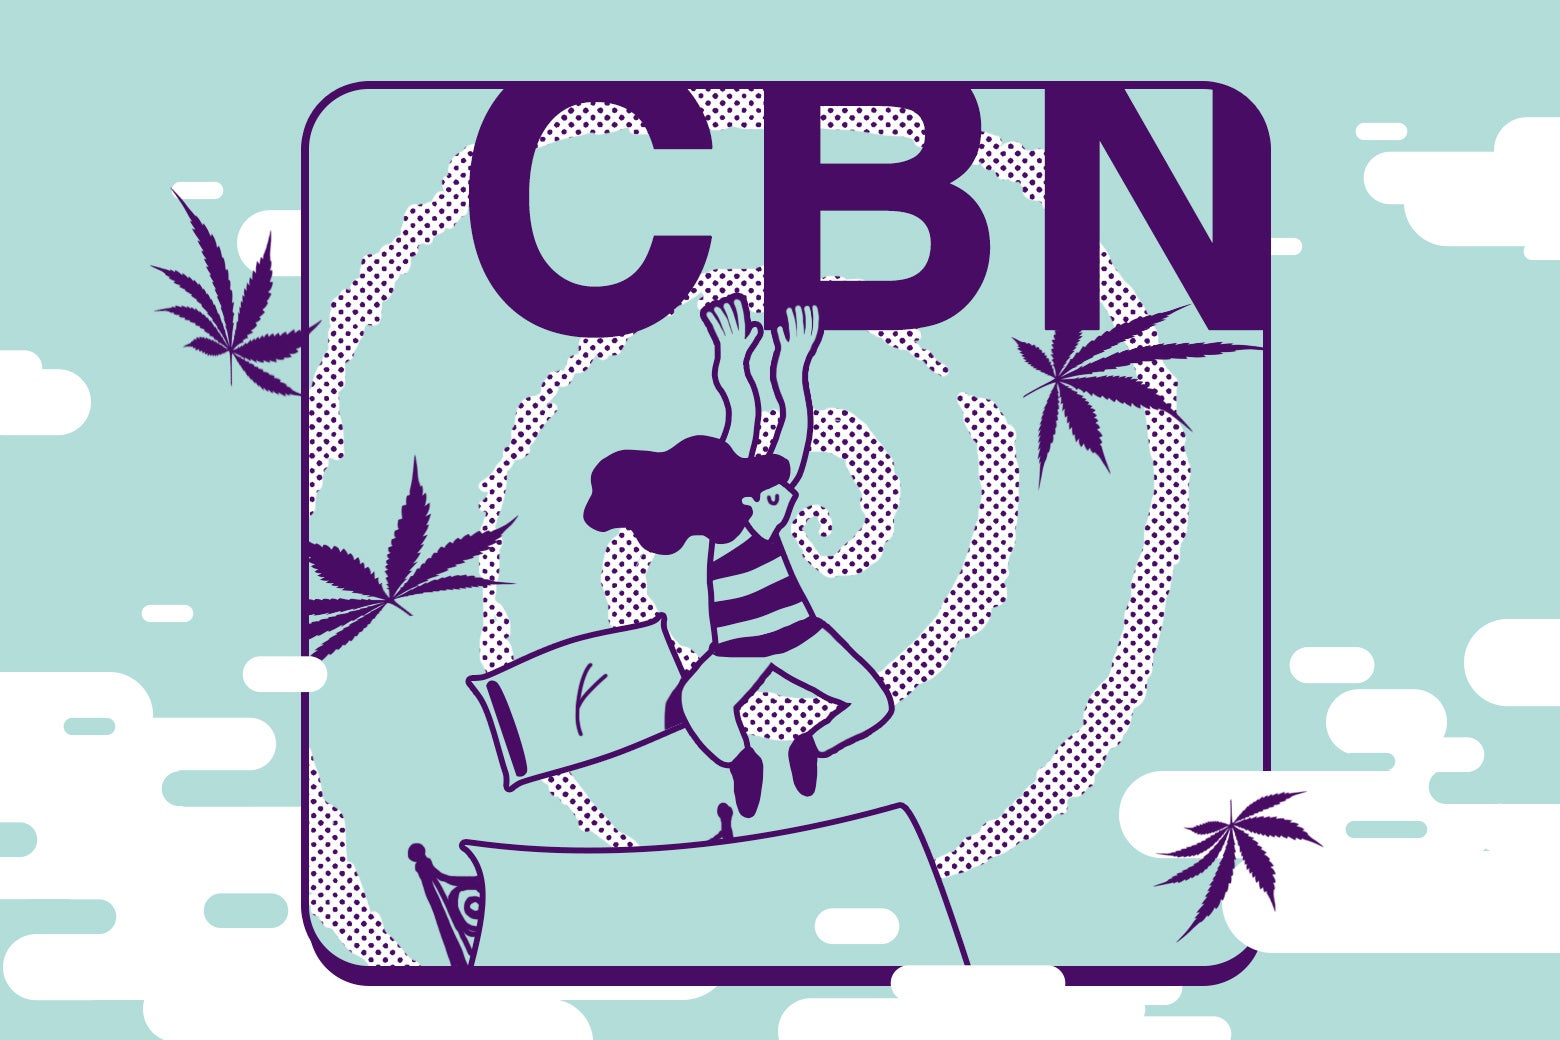 The letters CBN are seen on top of a spiral in which pot leaves, a woman, and a floating bed and pillow are swirling.